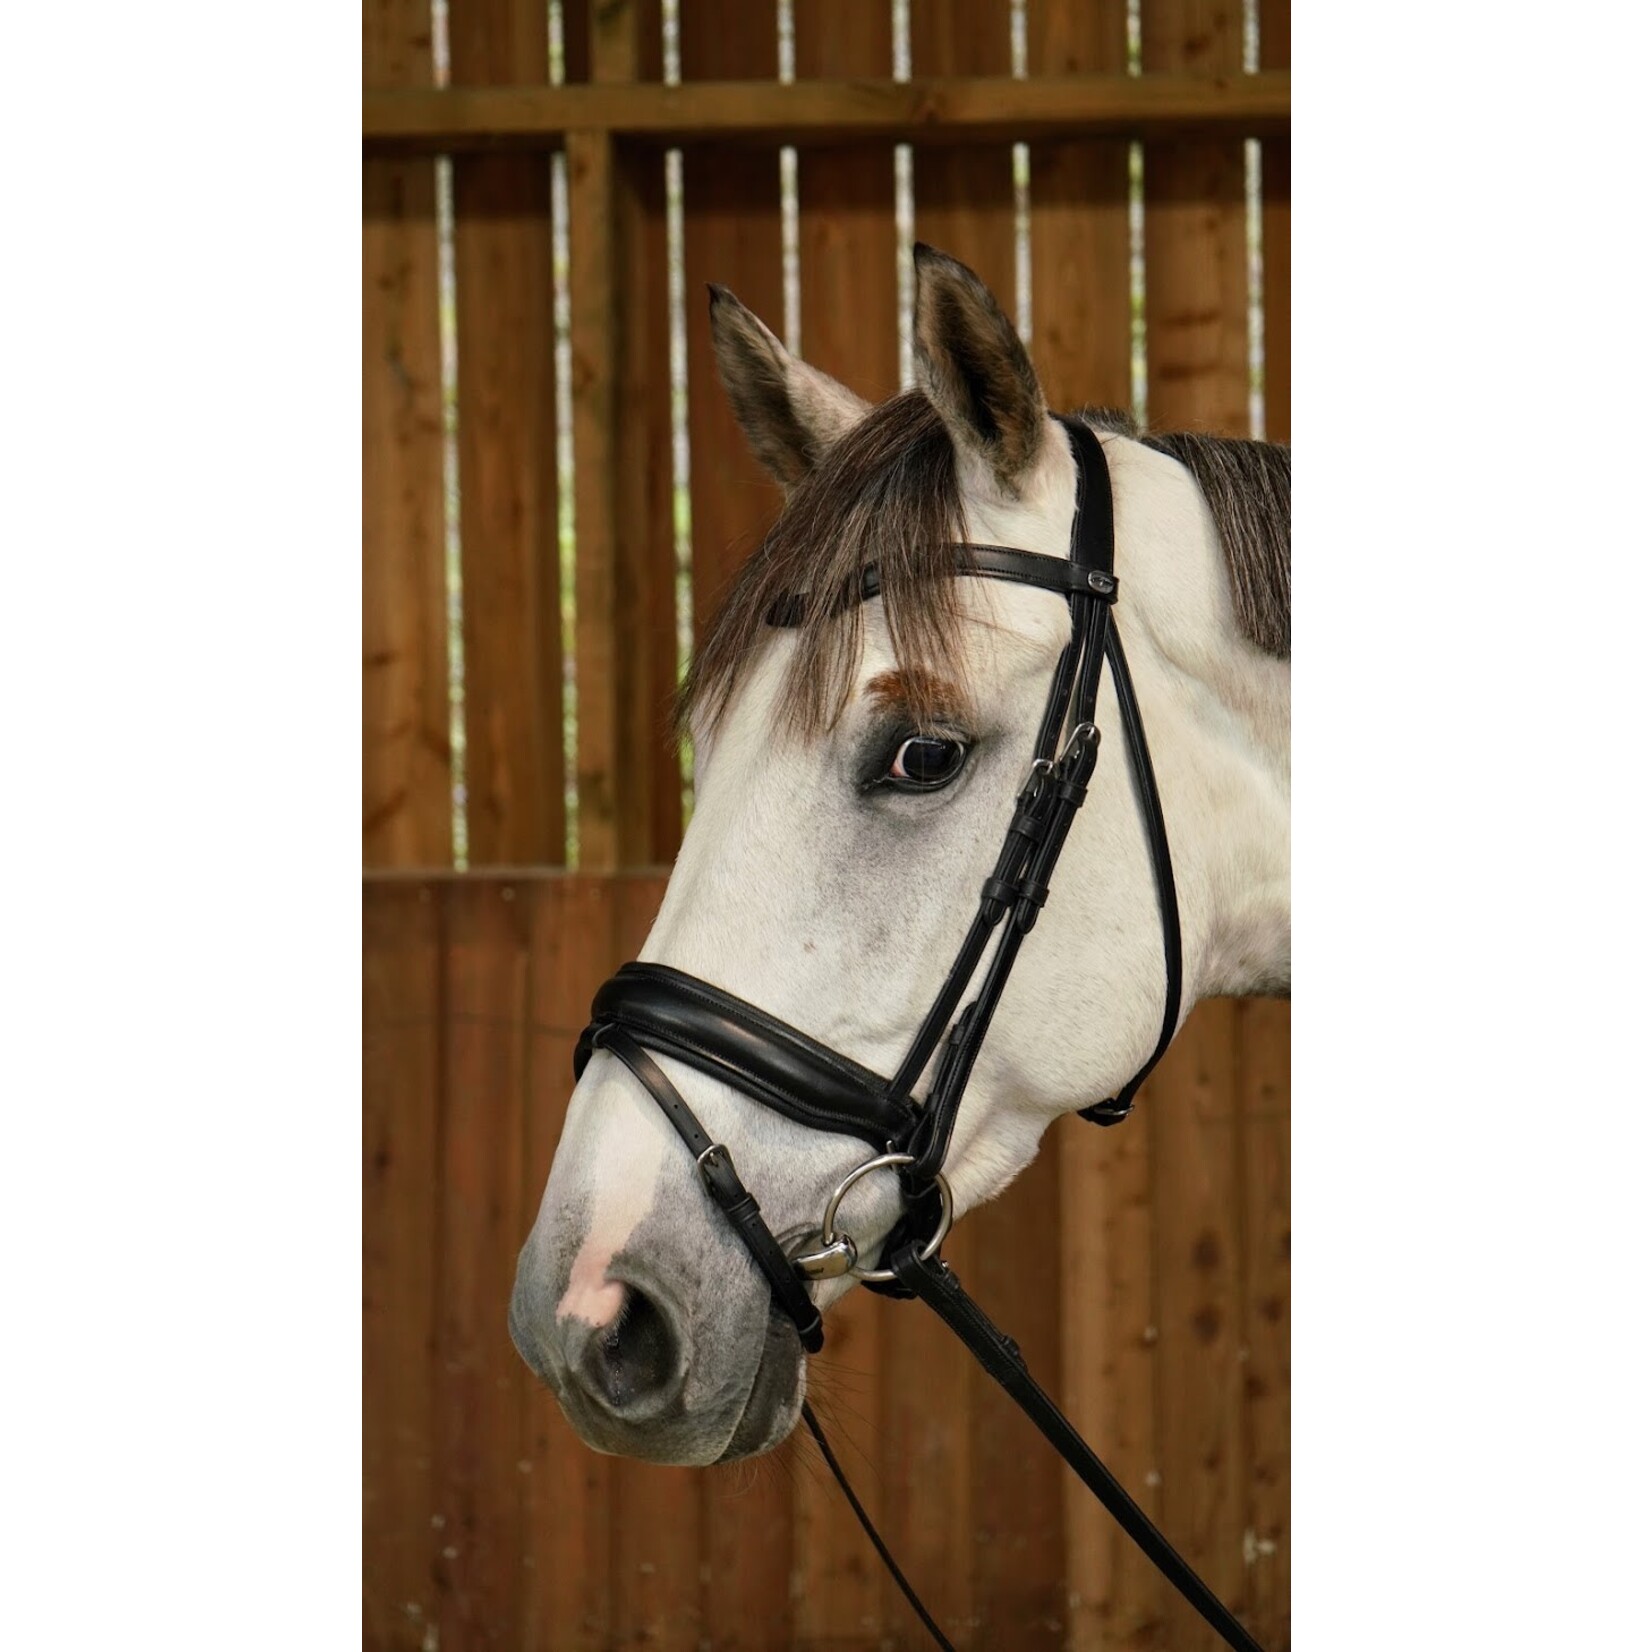 Dy'on WODCAM Dy'on Flat Leather Dressage Snaffle Bridle -Large crank flash noseband bridle, black padding. Reins sold separately.